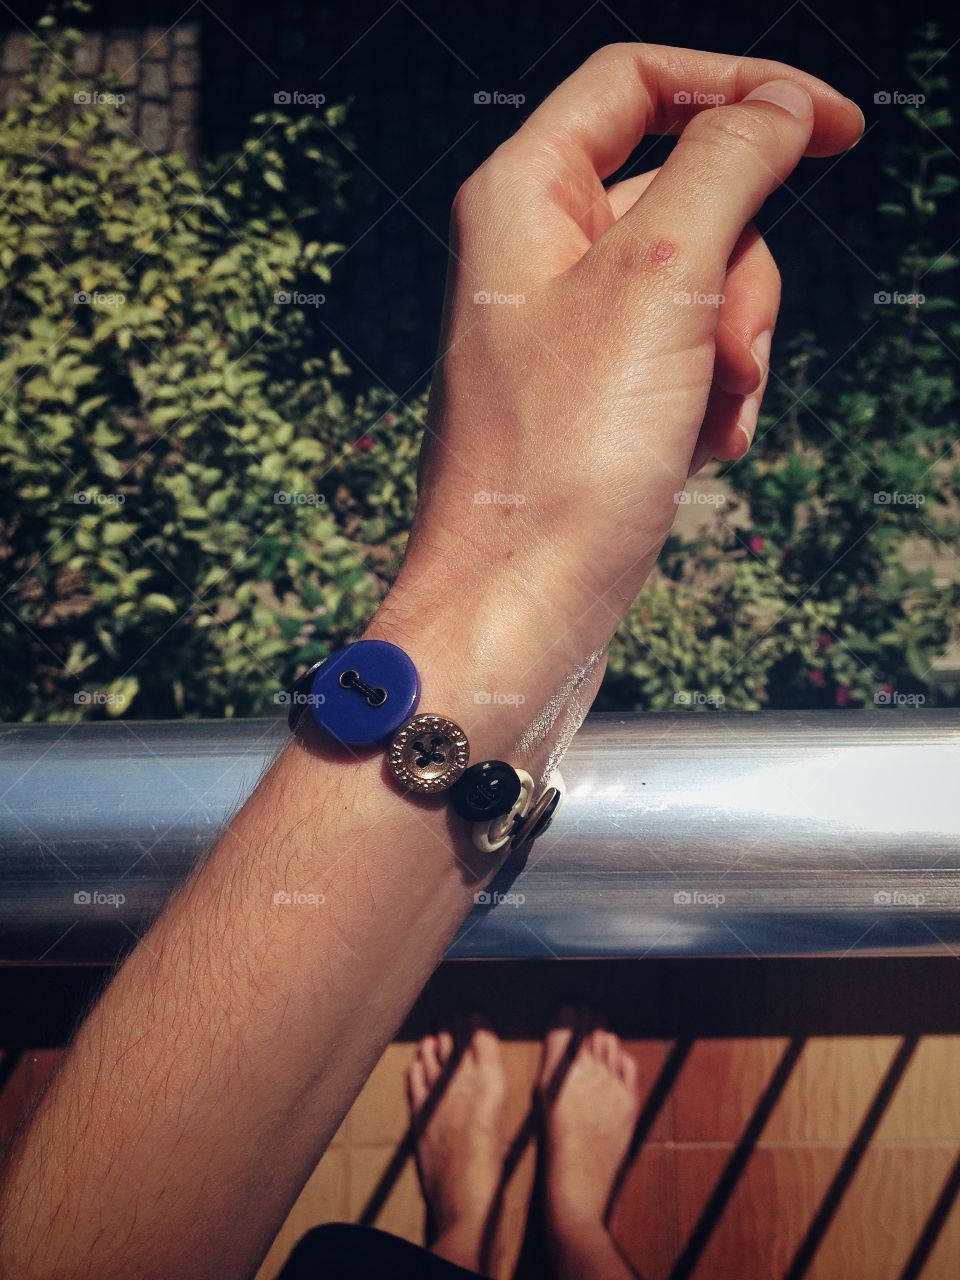 Hanging on the balcony, wearing a button bracelet made by myself. 